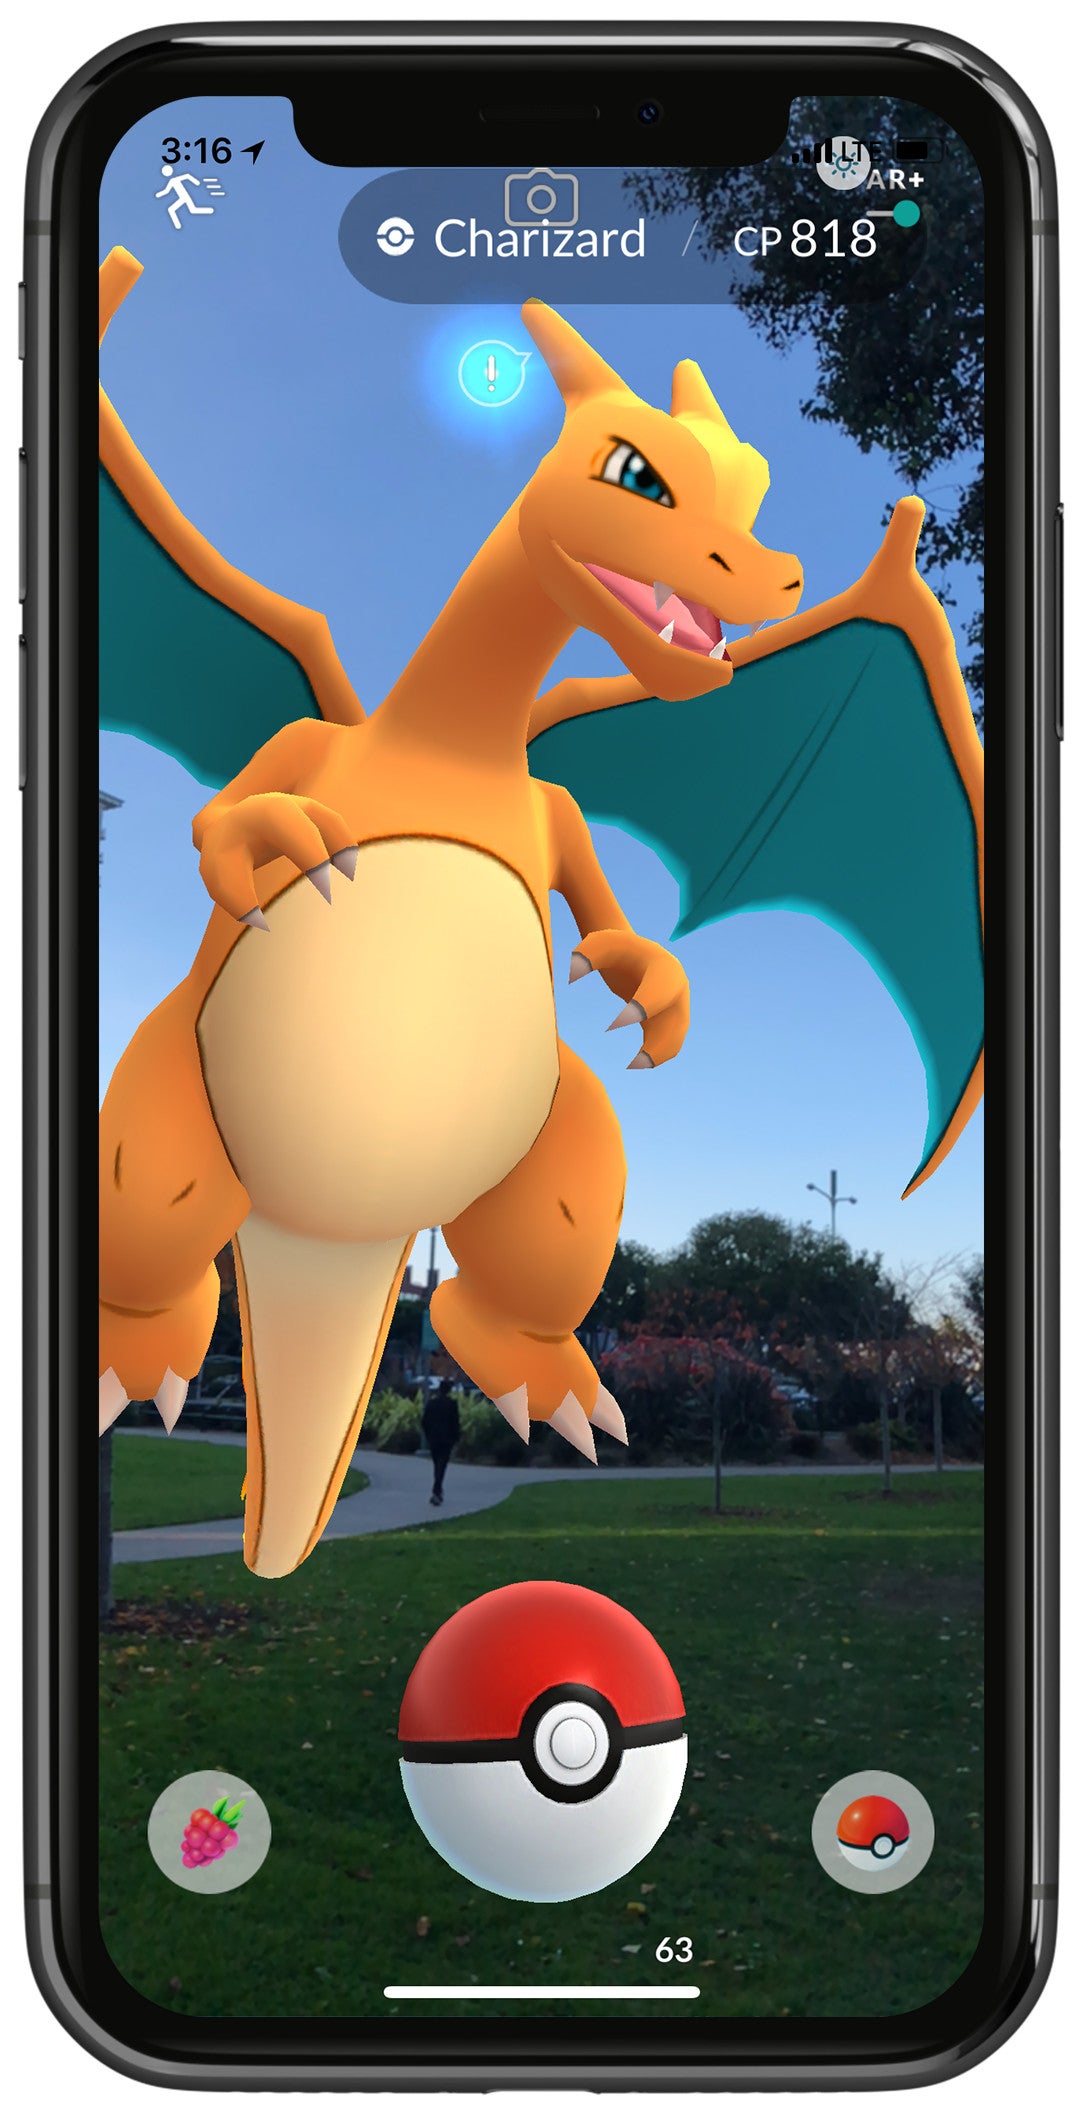 Pokemon GO update adds improved AR features on iOS devices